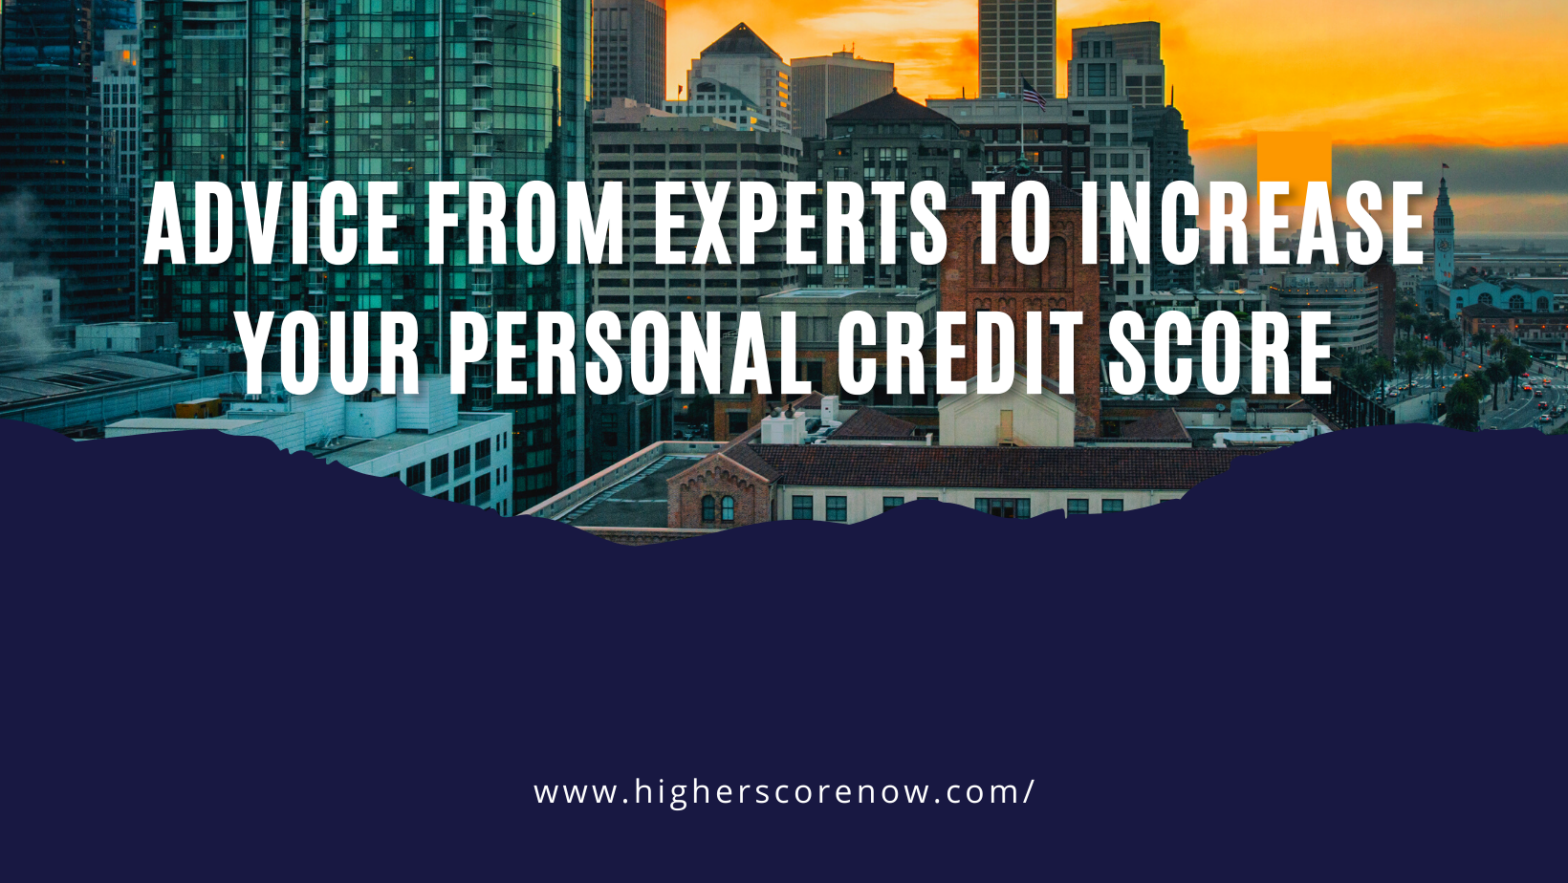 14 Strategies From Experts To Increase Your Personal Credit Score